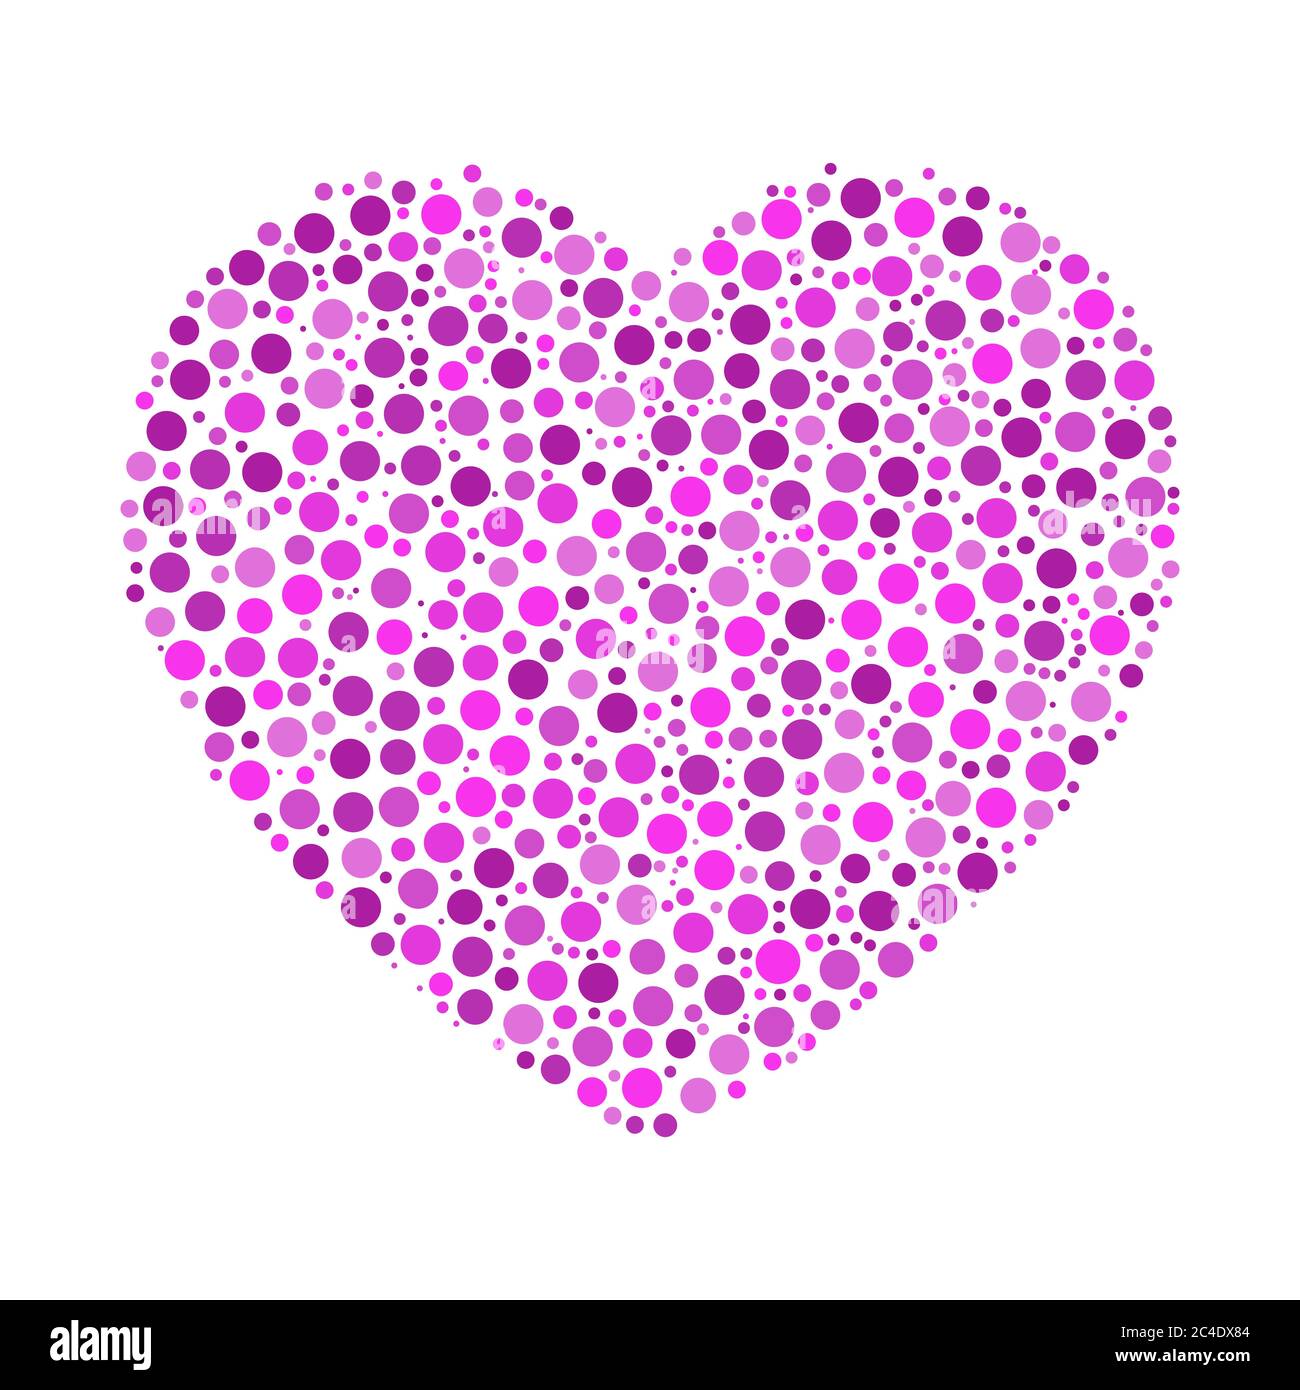 Heart mosaic of violet dots in various sizes and shades. Vector illustration on white background. Stock Vector